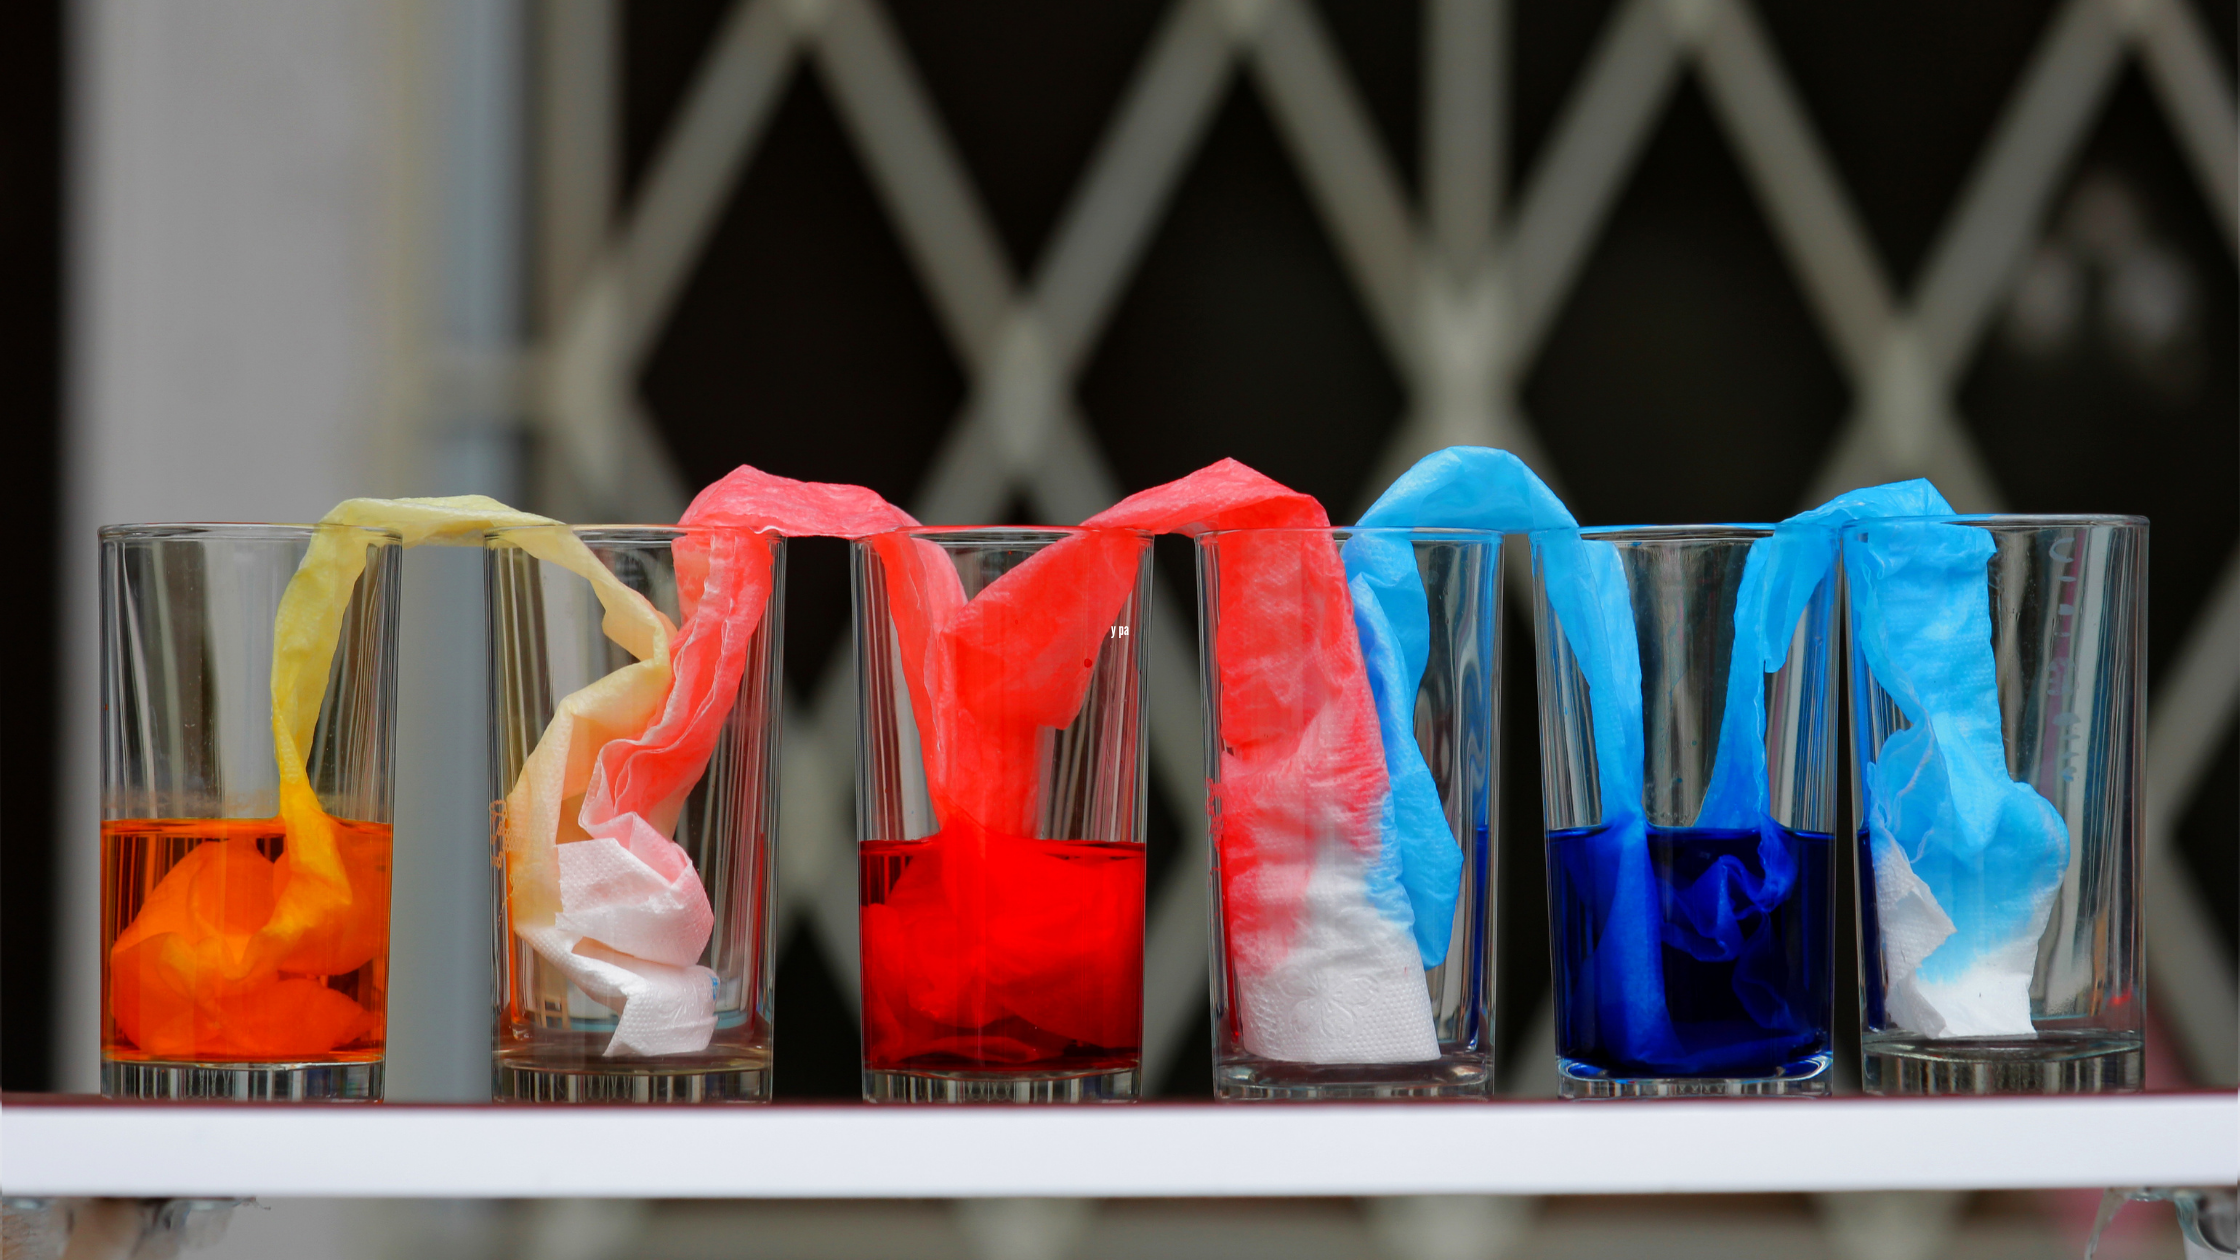 5 Fun & Cool Science Activities with Dye to Do With the Kids 11